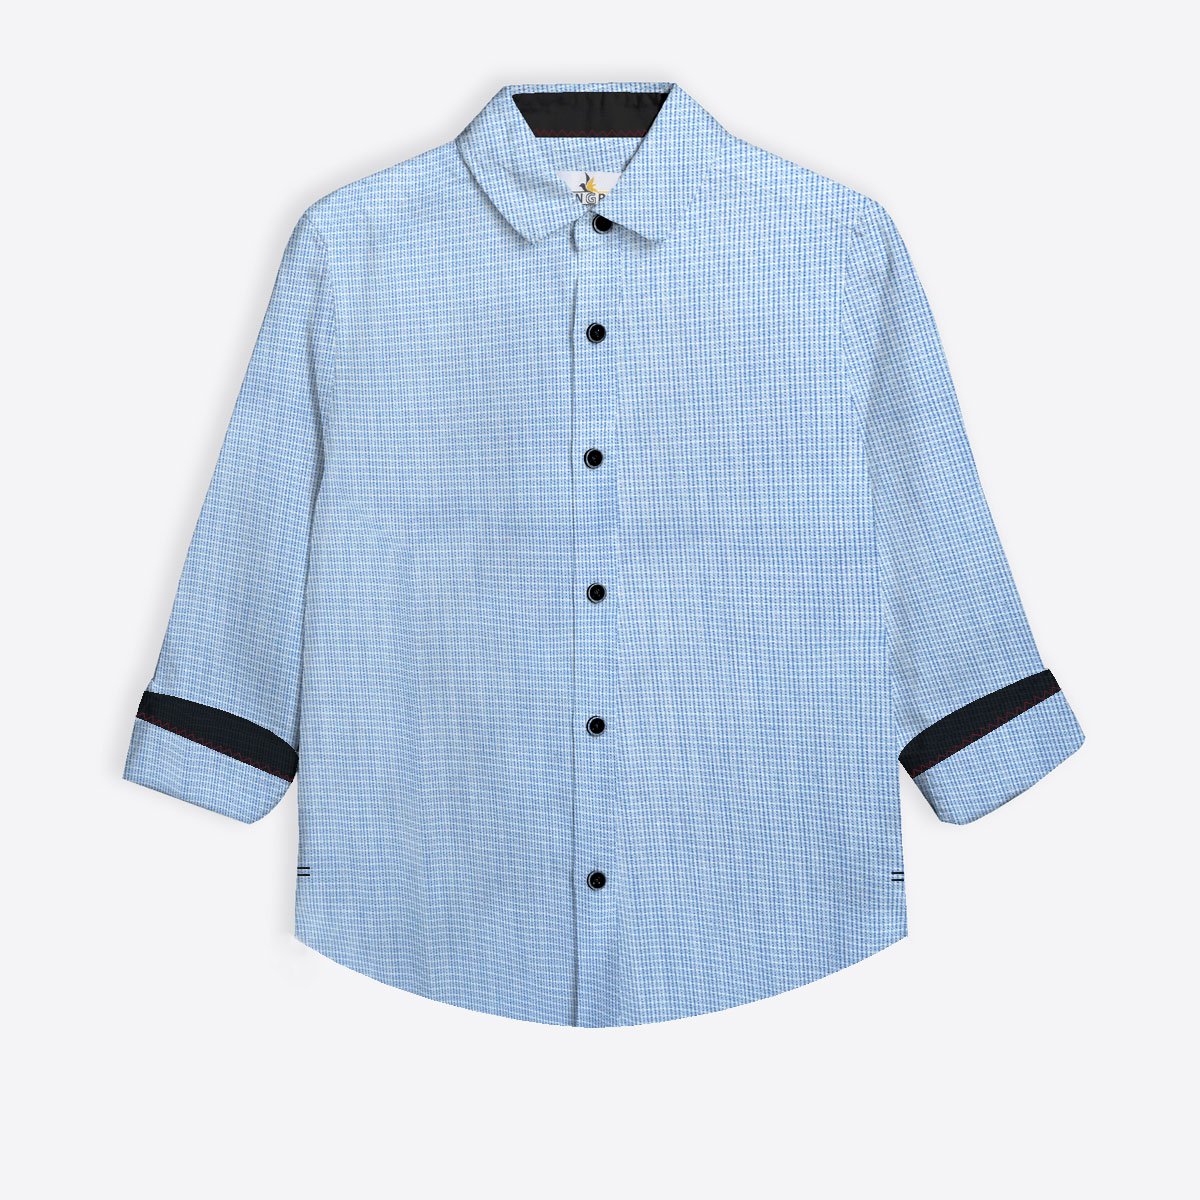 LAVISH BLUE BOY'S CASUAL SHIRT : Buy Online At Best Prices In Pakistan ...